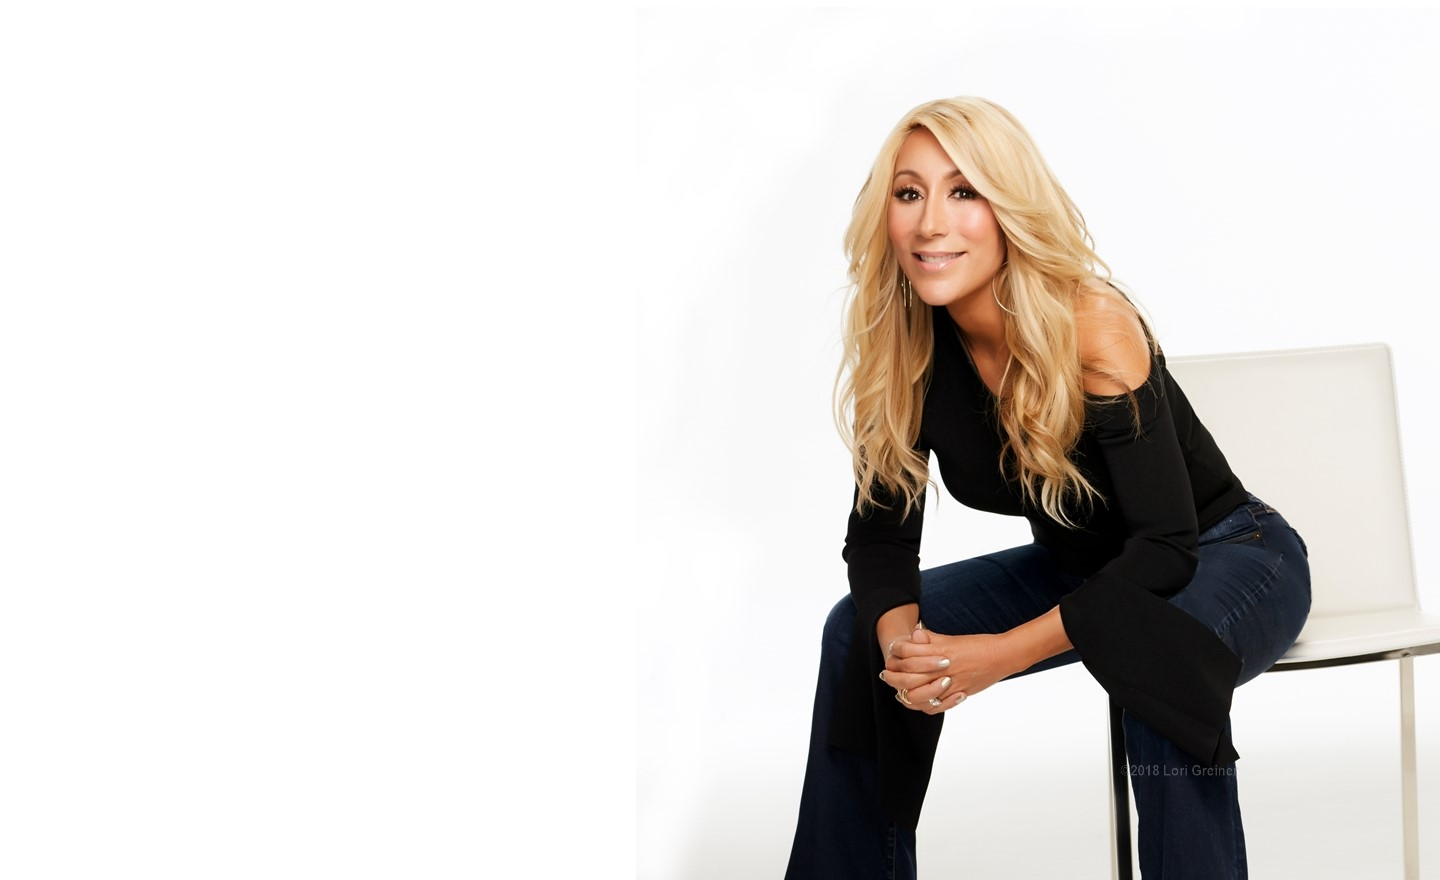 cely rodrigues recommends lori greiner sexy photos pic